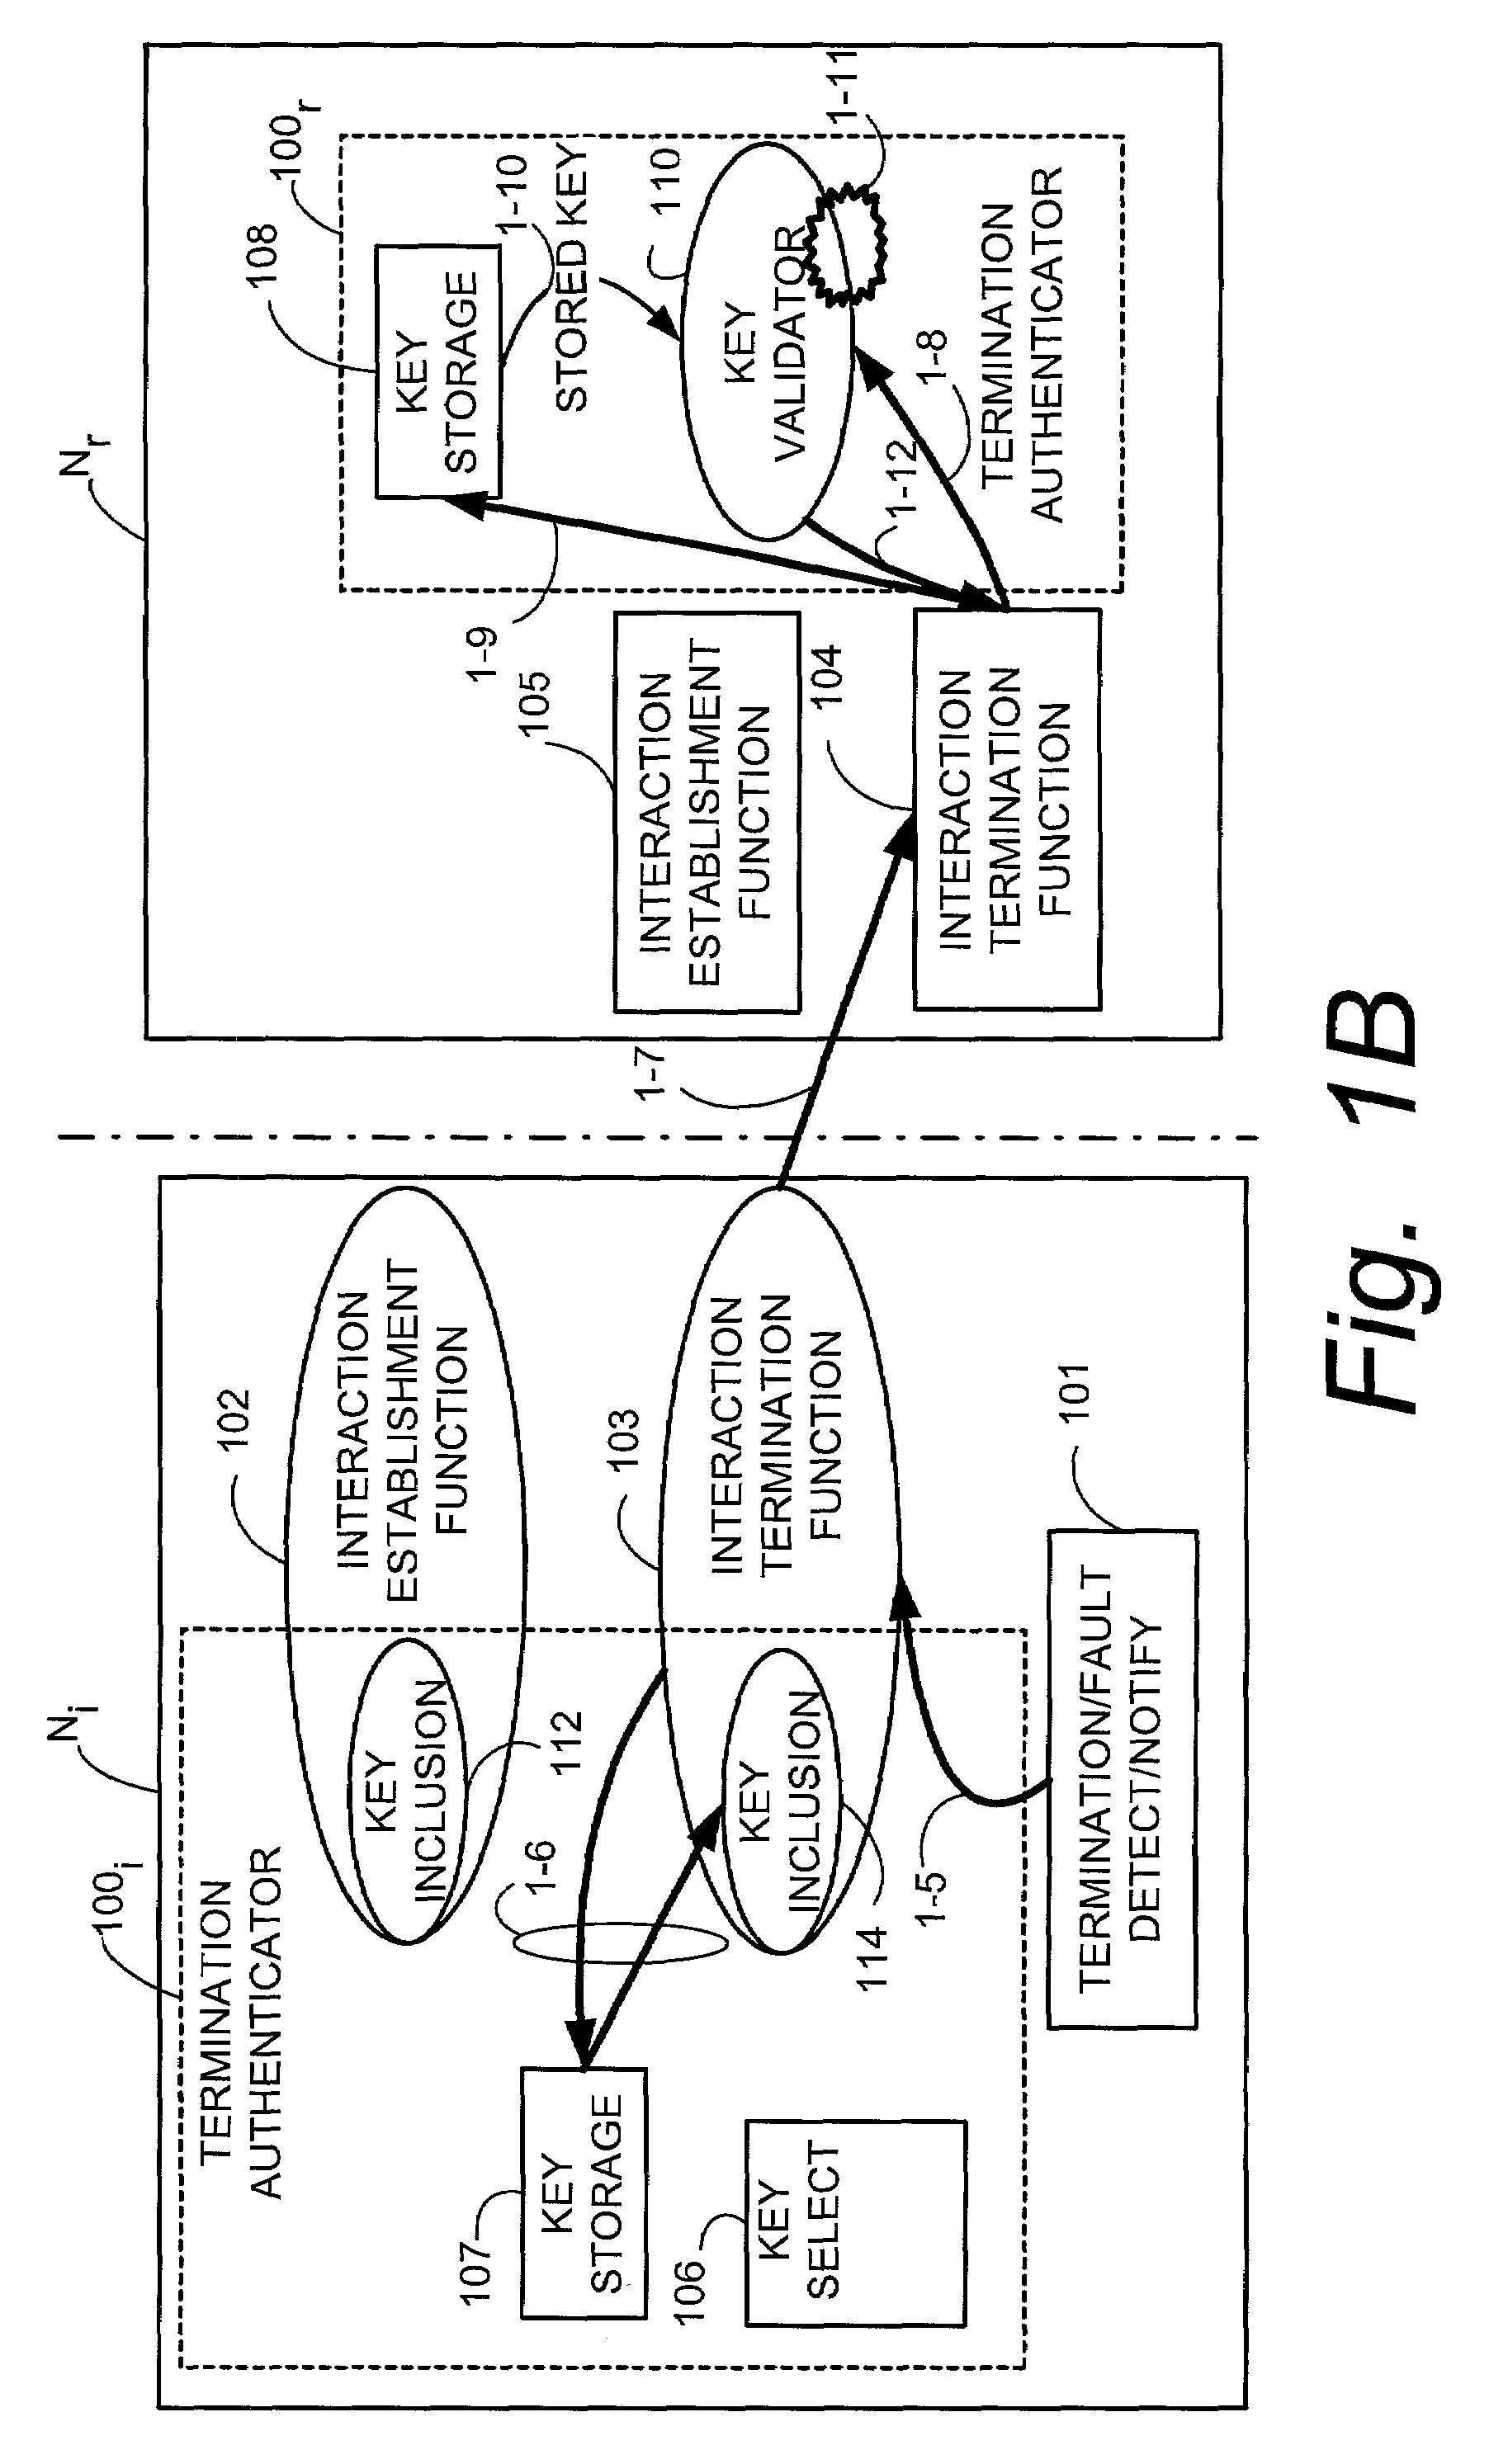 Authentication of termination messages in telecommunications system